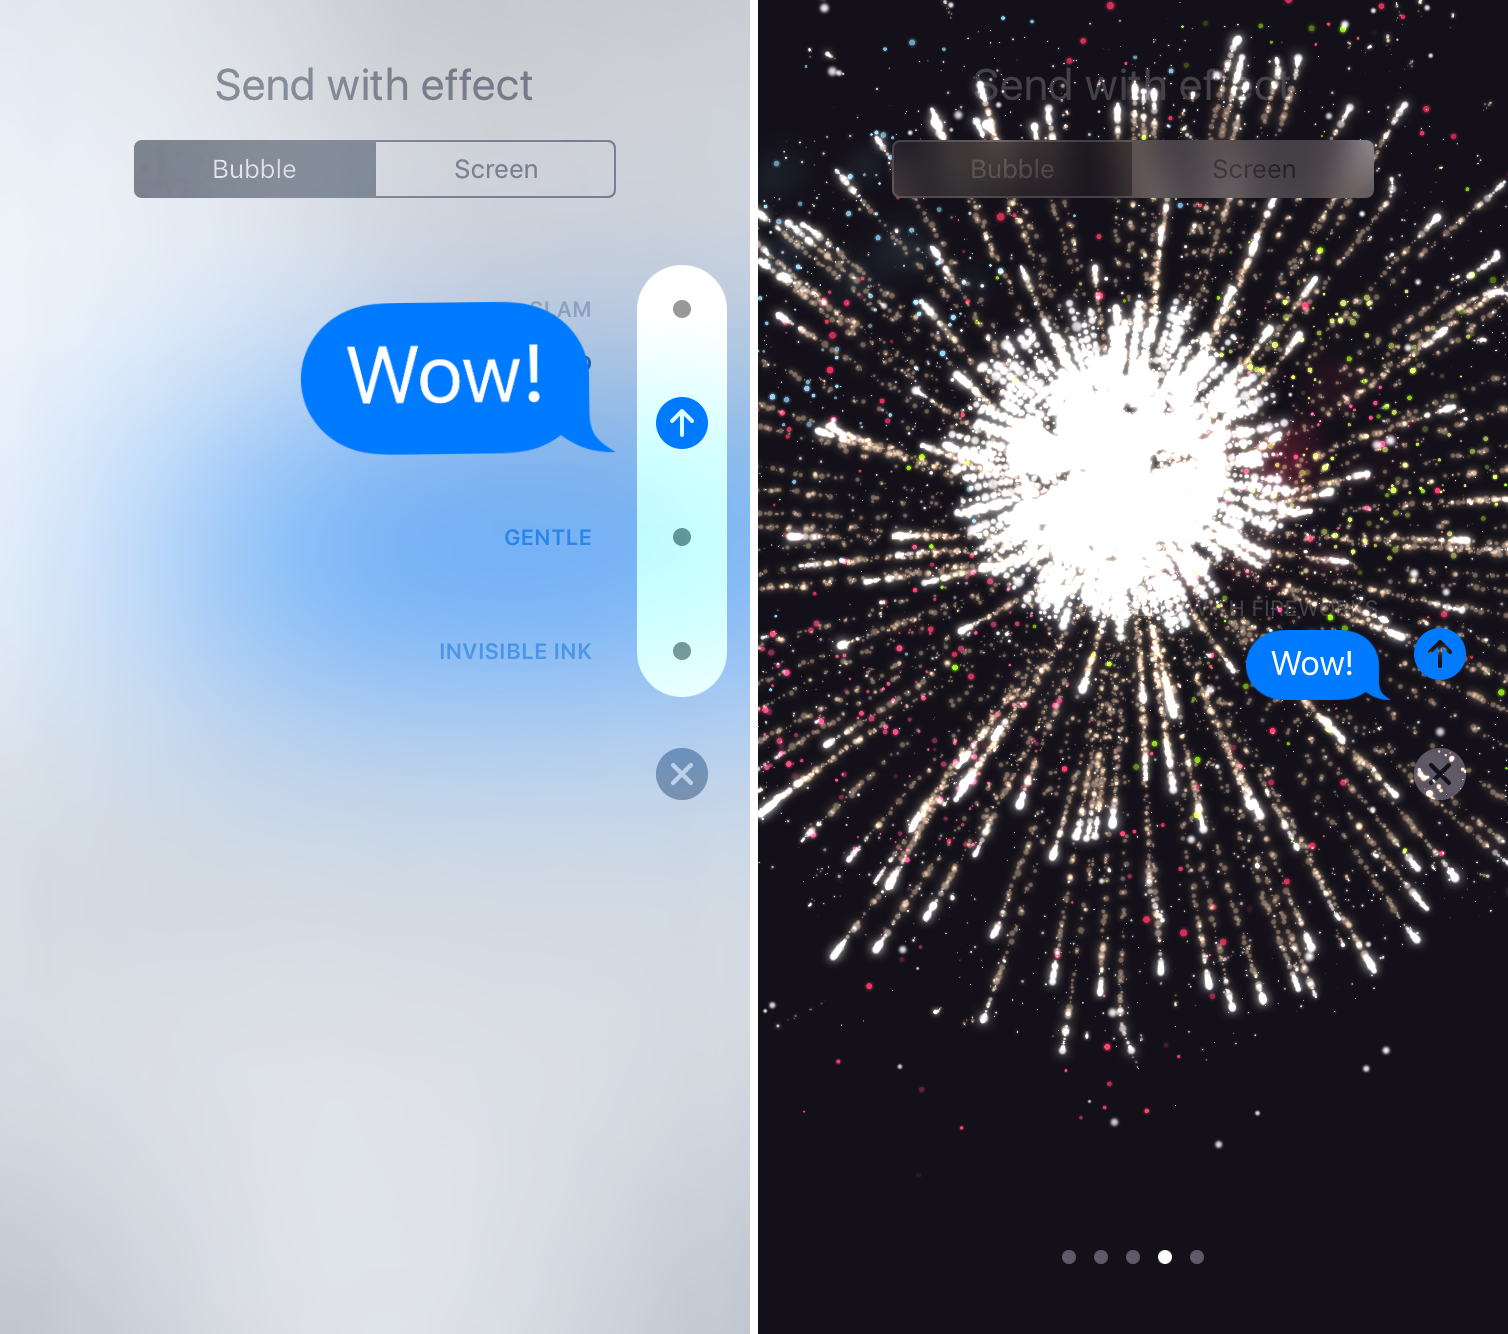 send-with-effects-imessage-ios-10